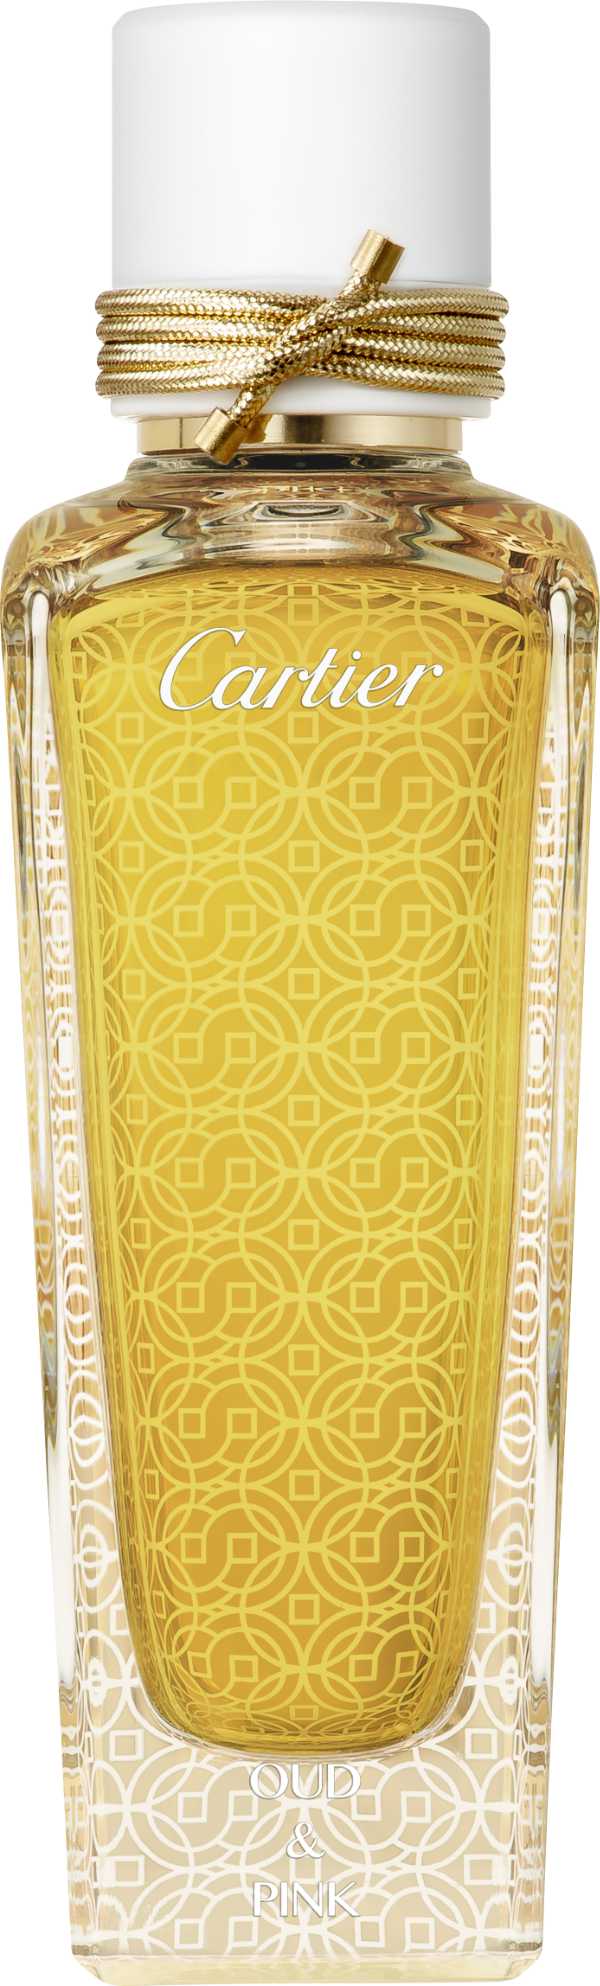 I Only Love Wild Roses - New Fragrances From Cartier